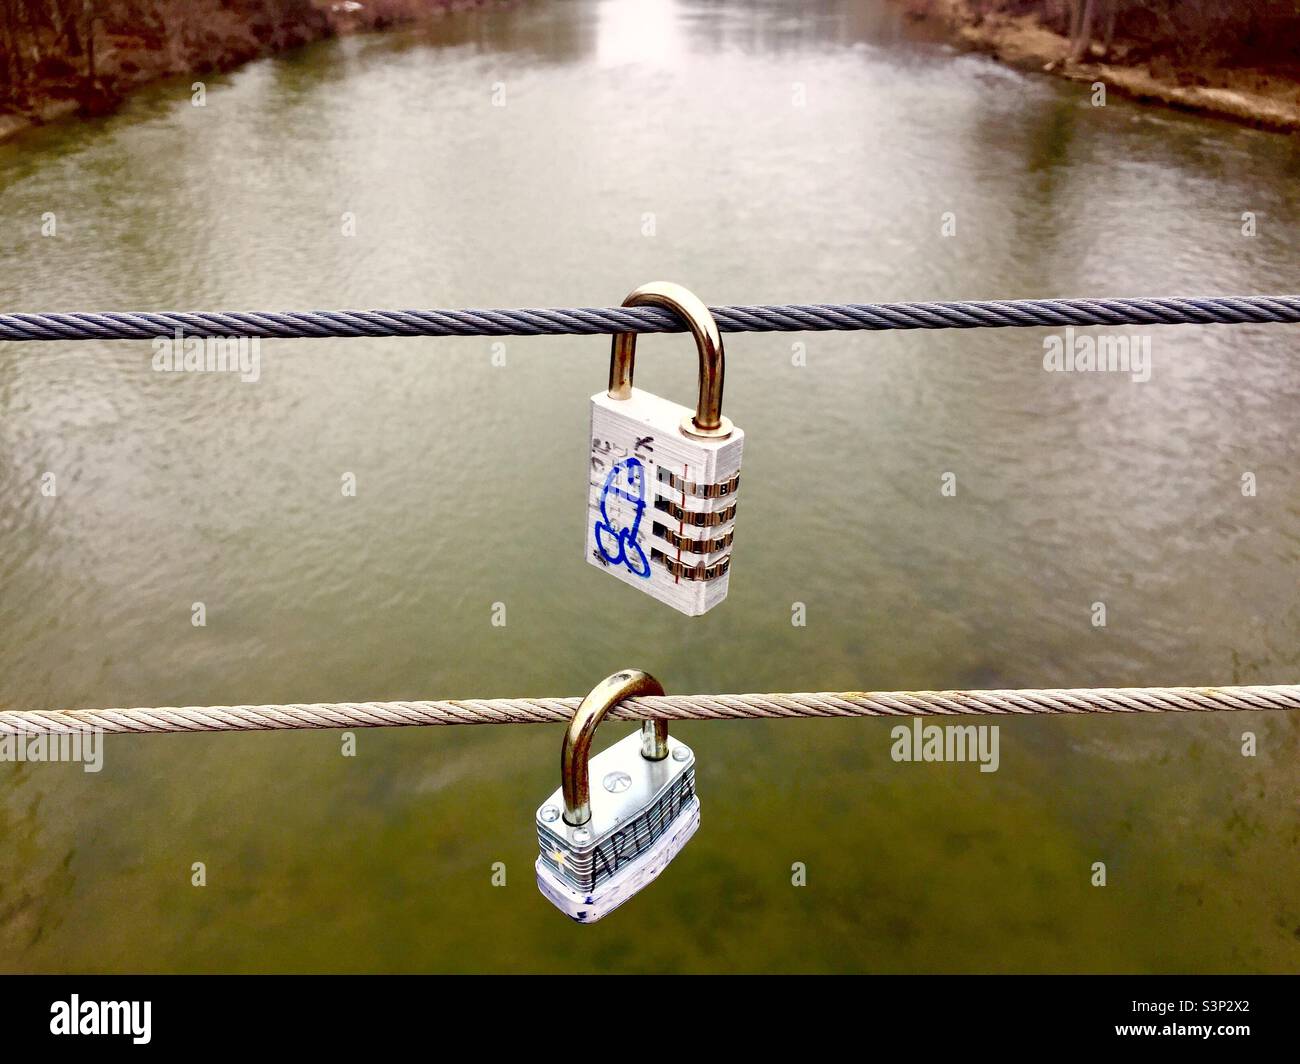 The river of love. Love lock with a fish motif. Two locks on steel cables overlooking flowing water. Fresh. No rust yet. Classic icons. Stock Photo